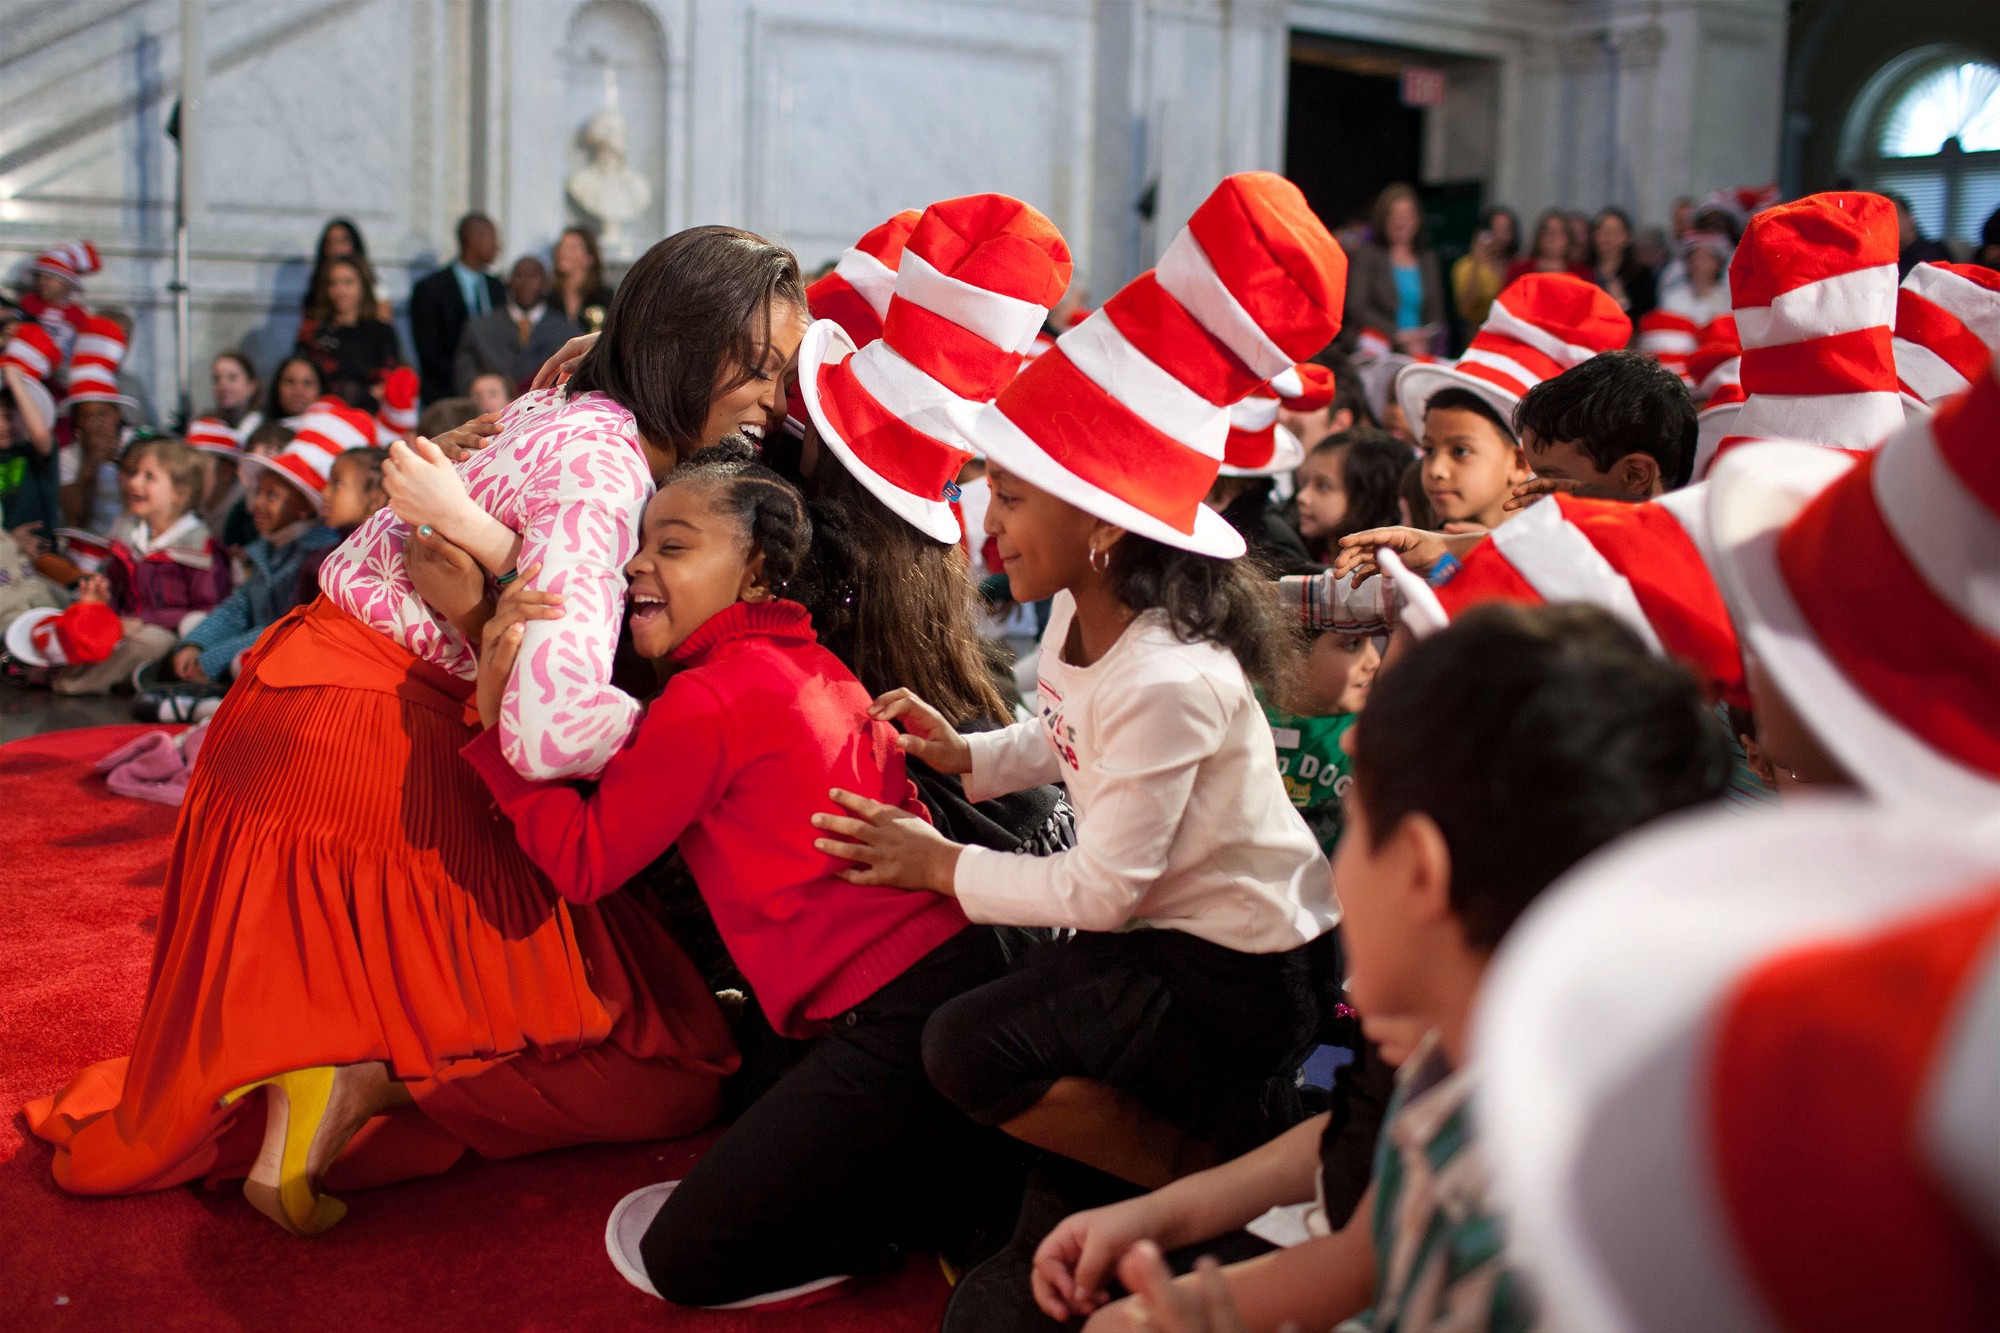 March 2, 2011. With students after reading “Green Eggs and Ham” by Dr. Seuss at the Library of Congress. (Official White House Photo by Chuck Kennedy)